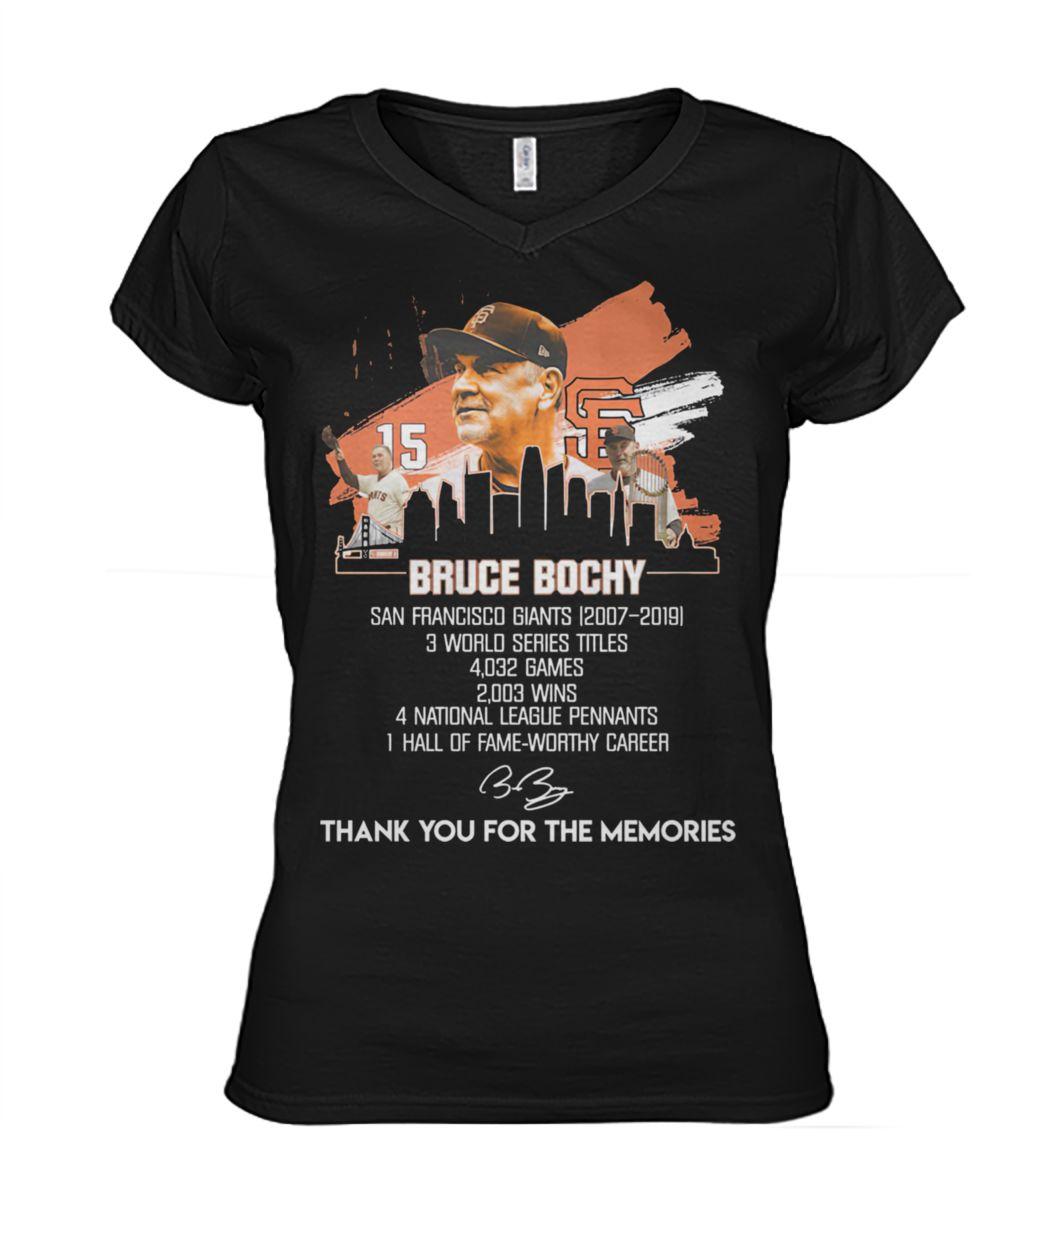 Bruce bochy san francisco giants 2007-2019 thank you for the memories women's v-neck